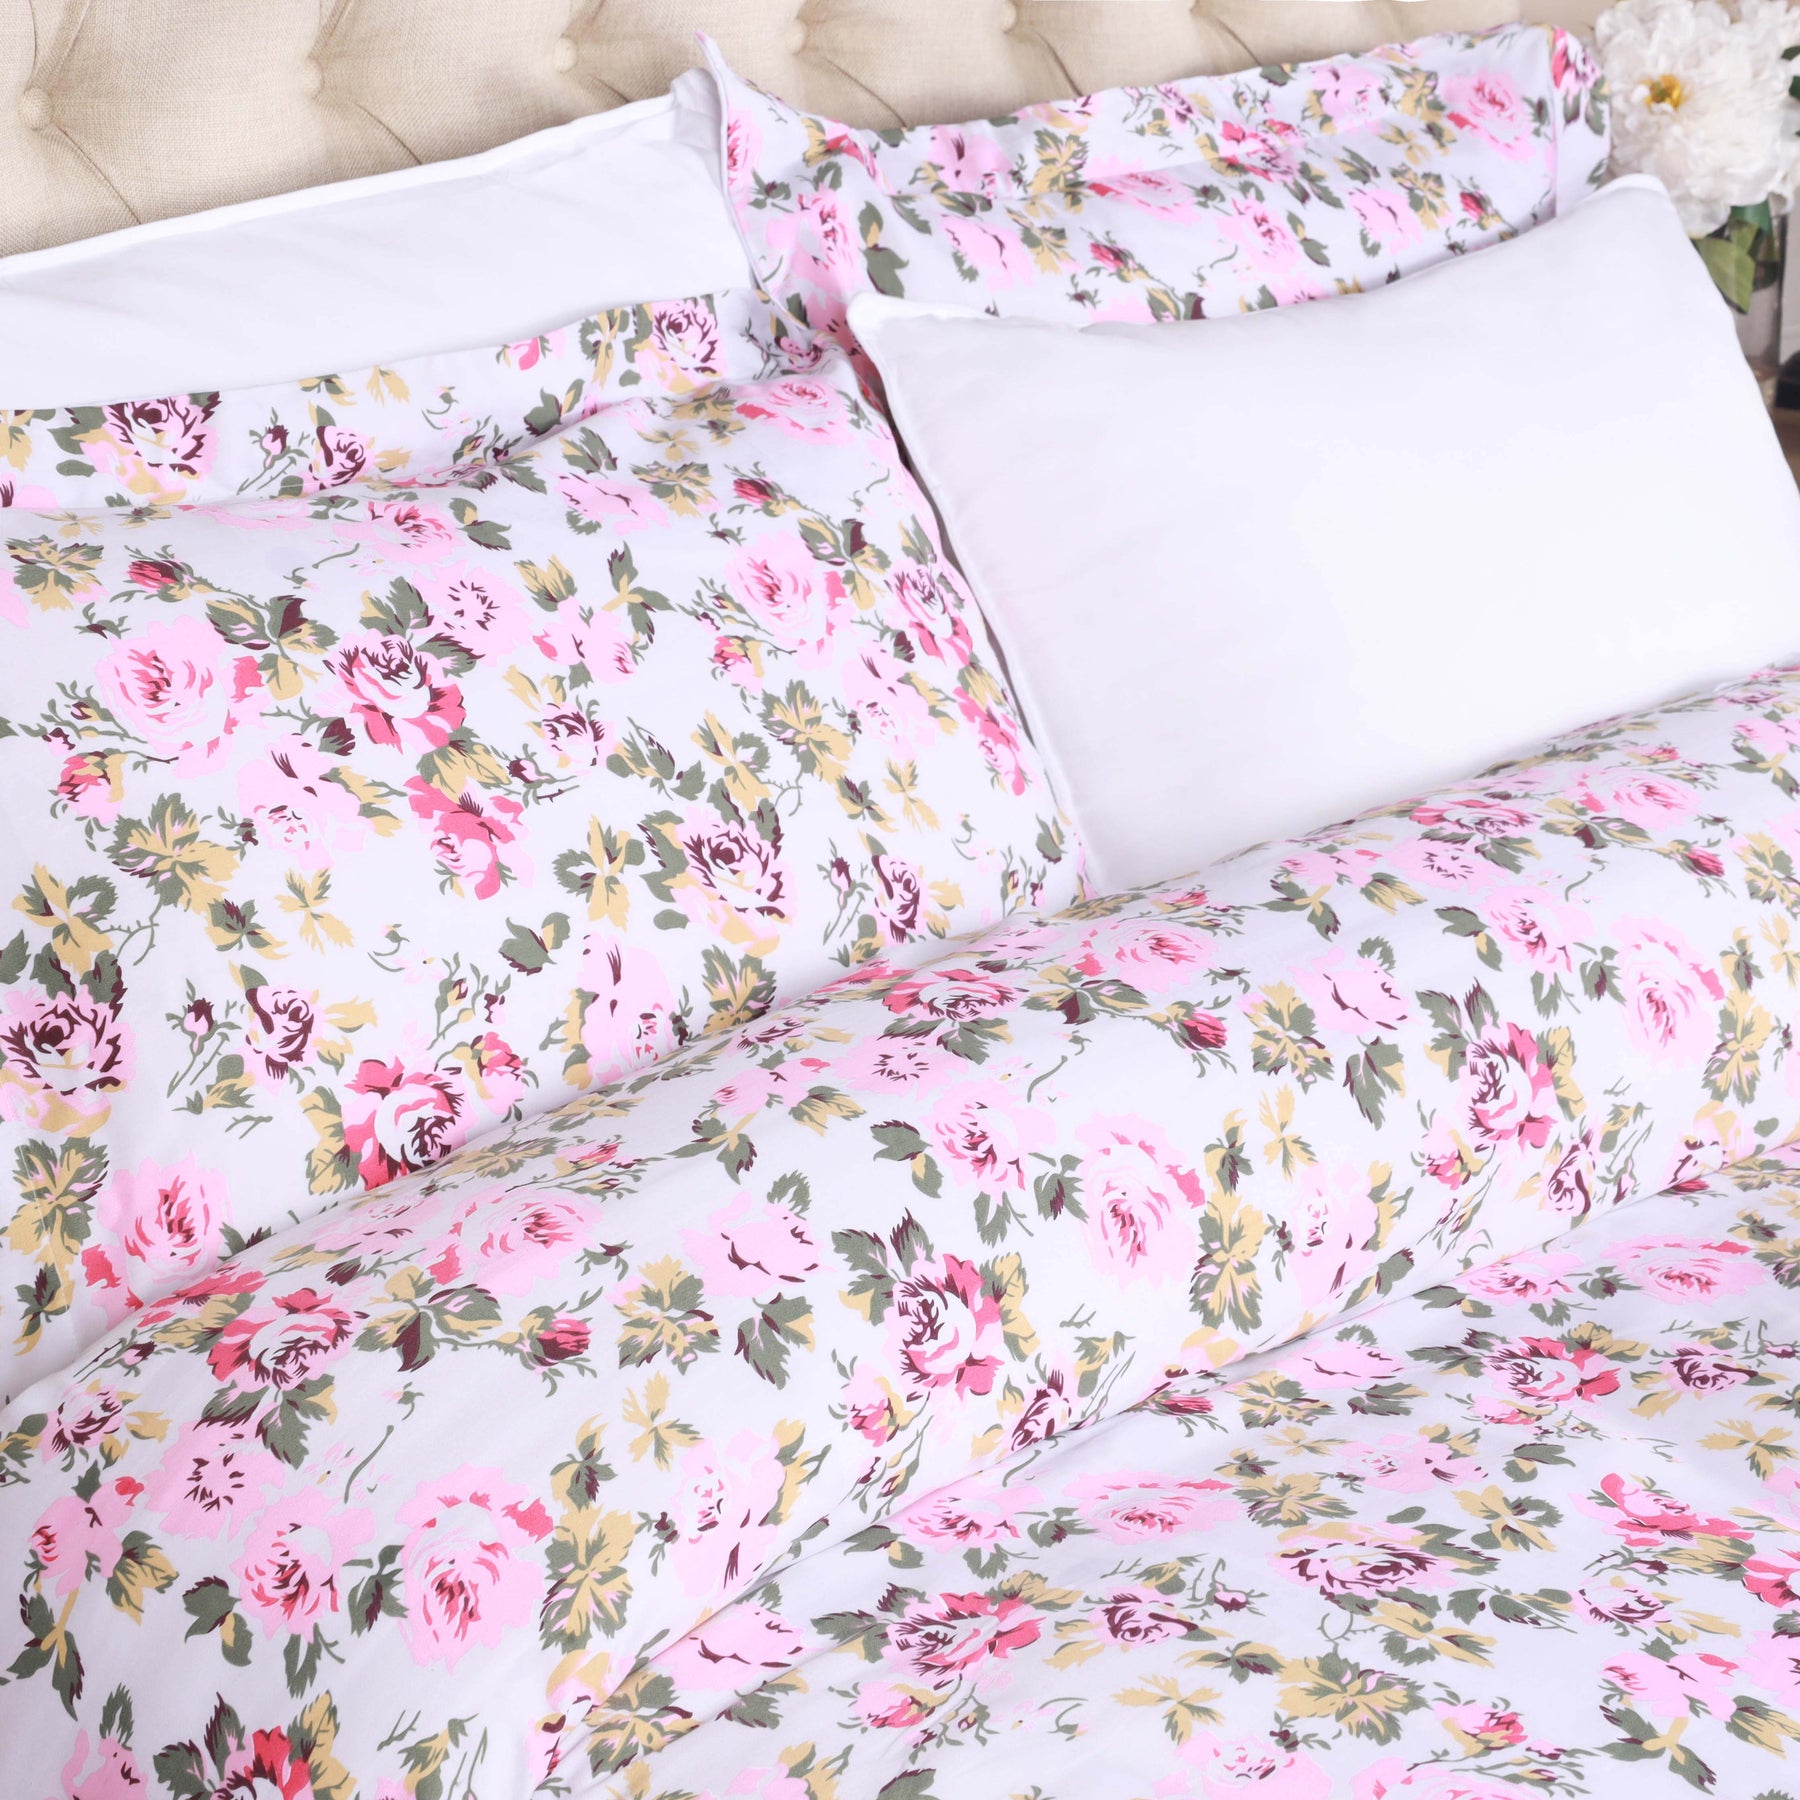 300 Thread Count Solid or Floral Cotton All-Season Duvet Cover Set